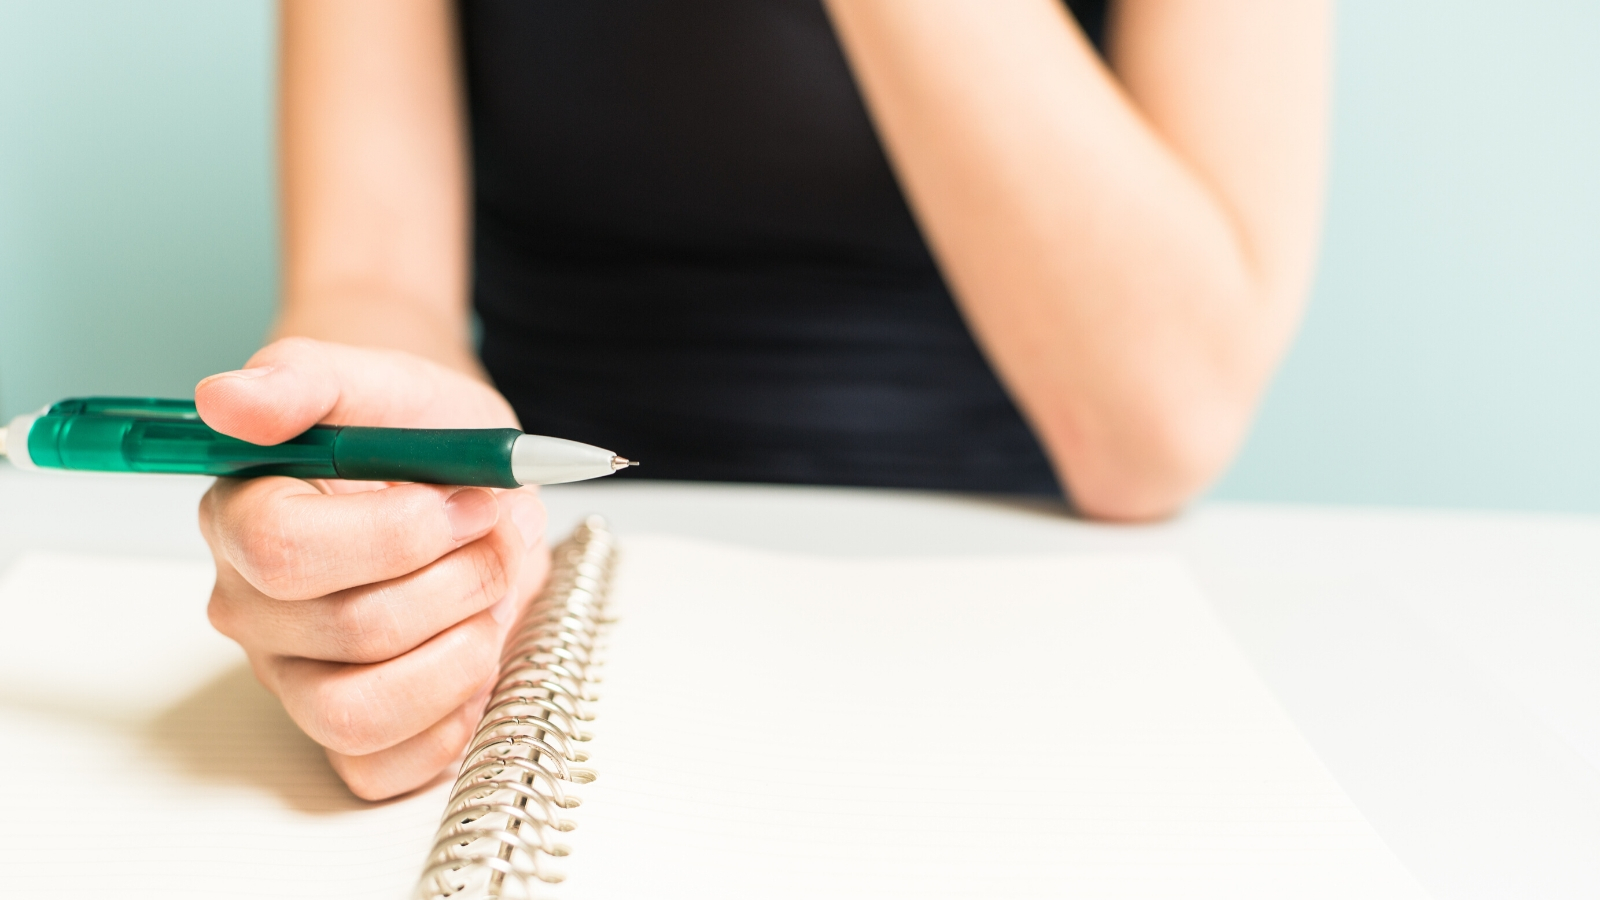 A person sits at a table holding a pen in front of some paper